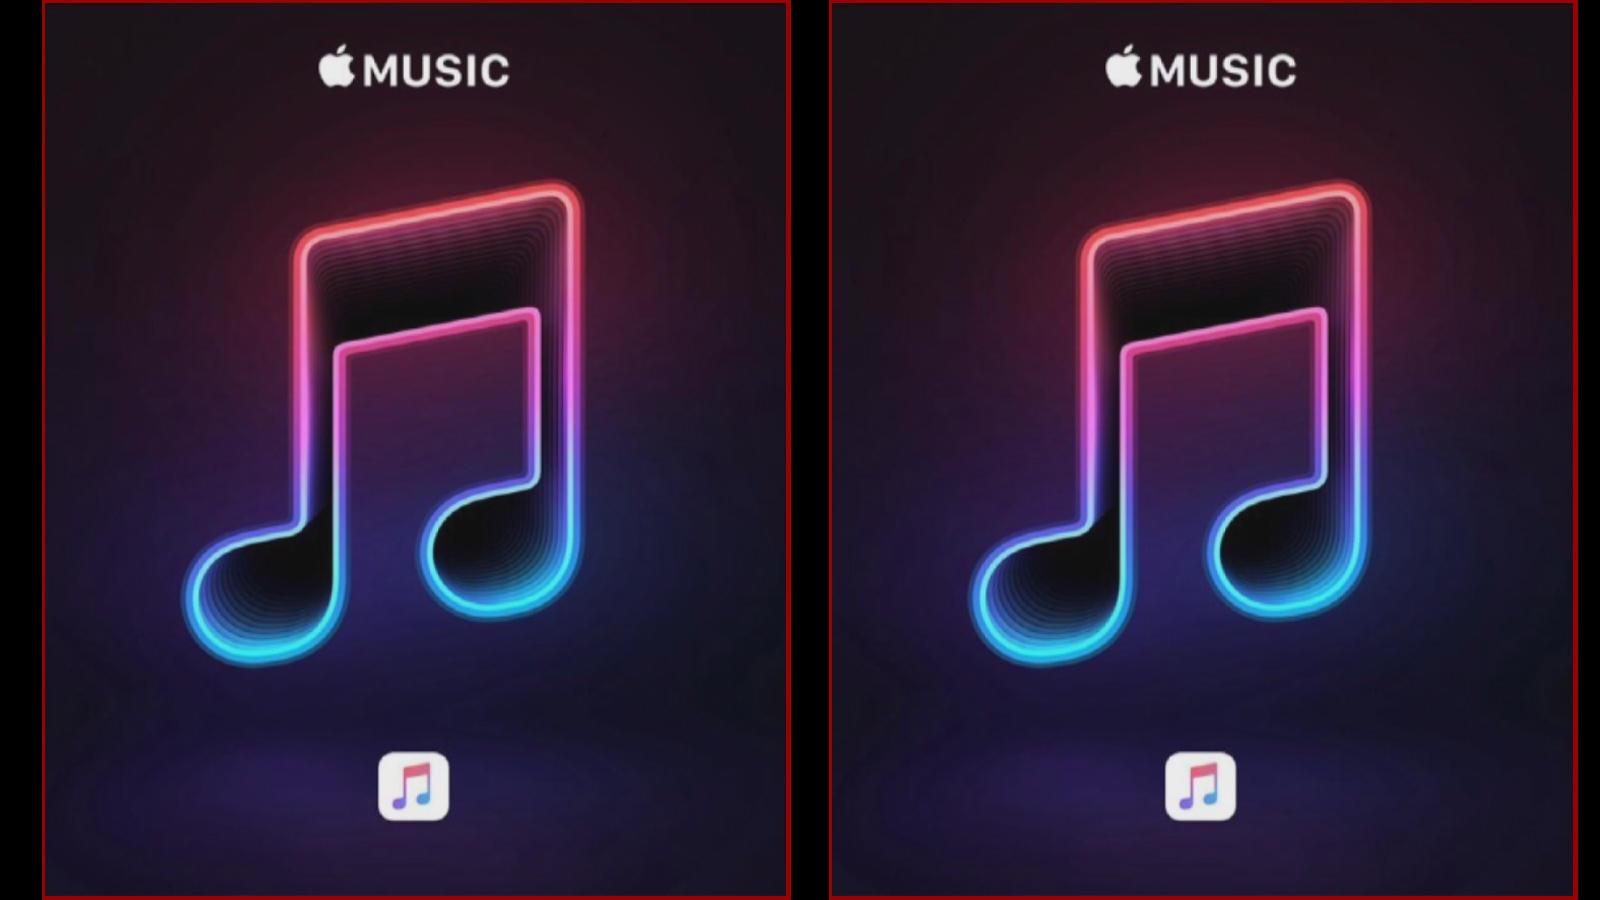 Apple Music rolls out 'Replay' to show your top songs